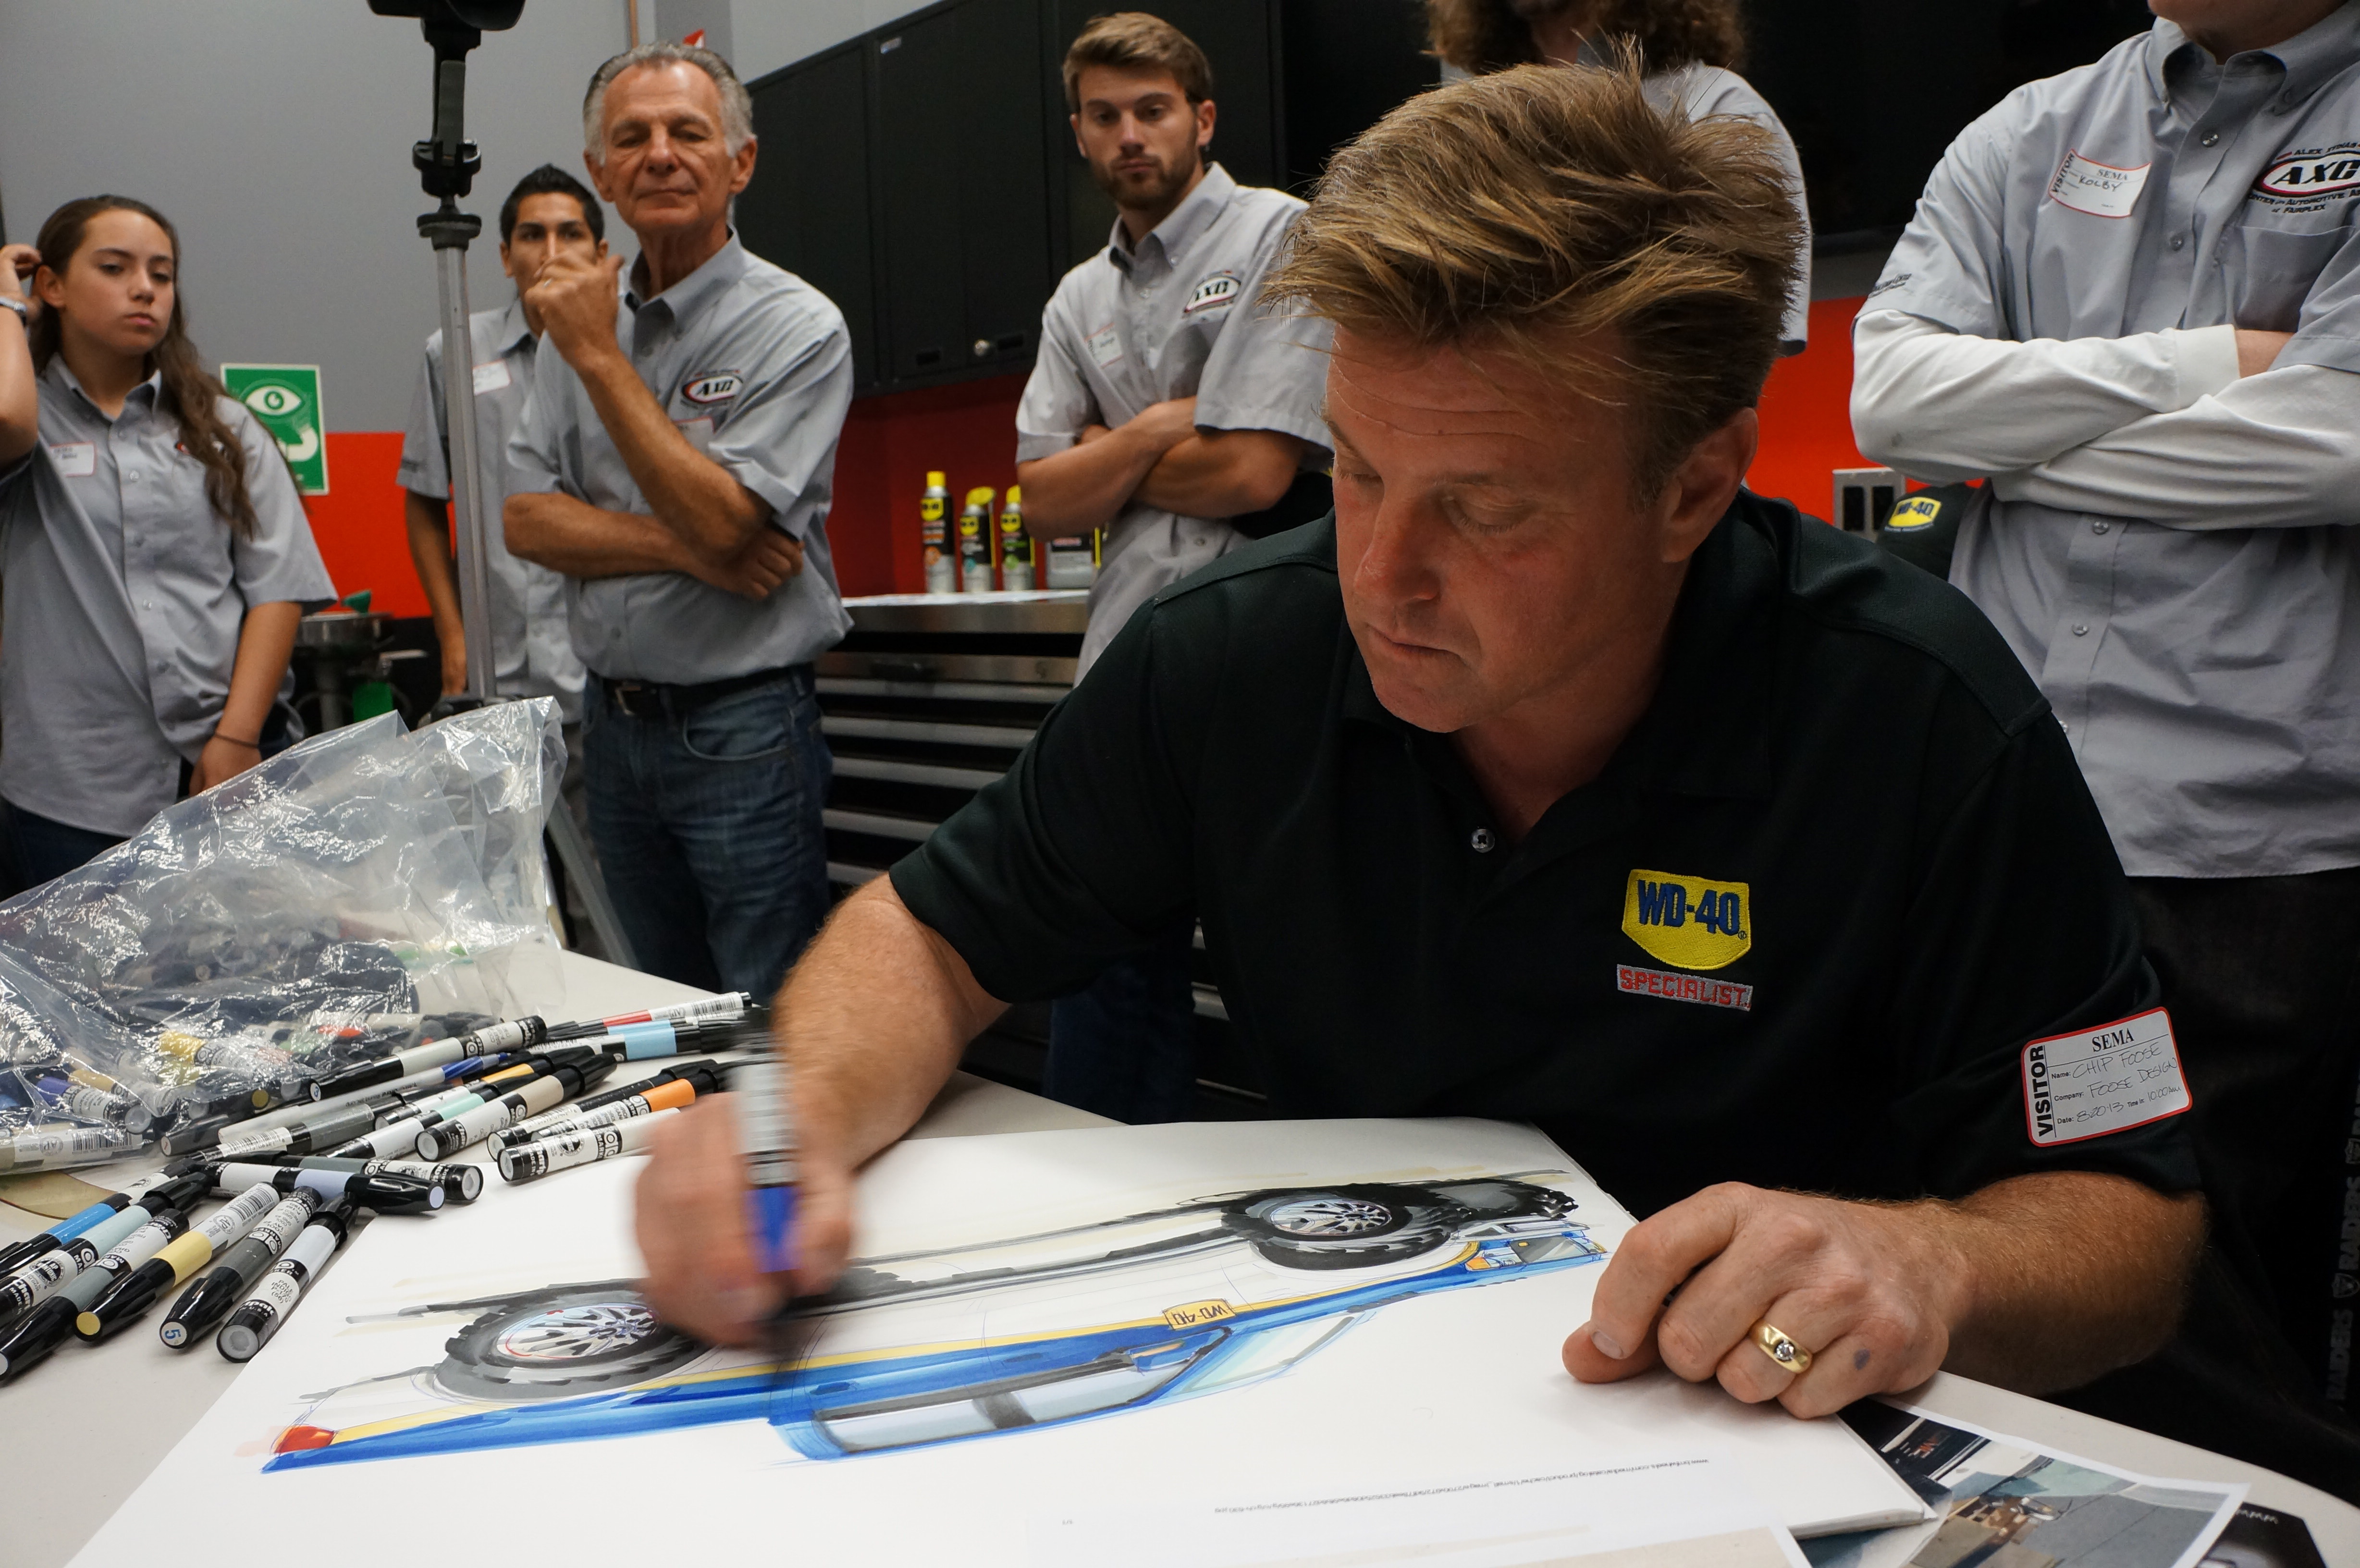 WD40 Company and Chip Foose Partner for Third Year to Design New Ford  OffRoad Truck for Charity  Business Wire